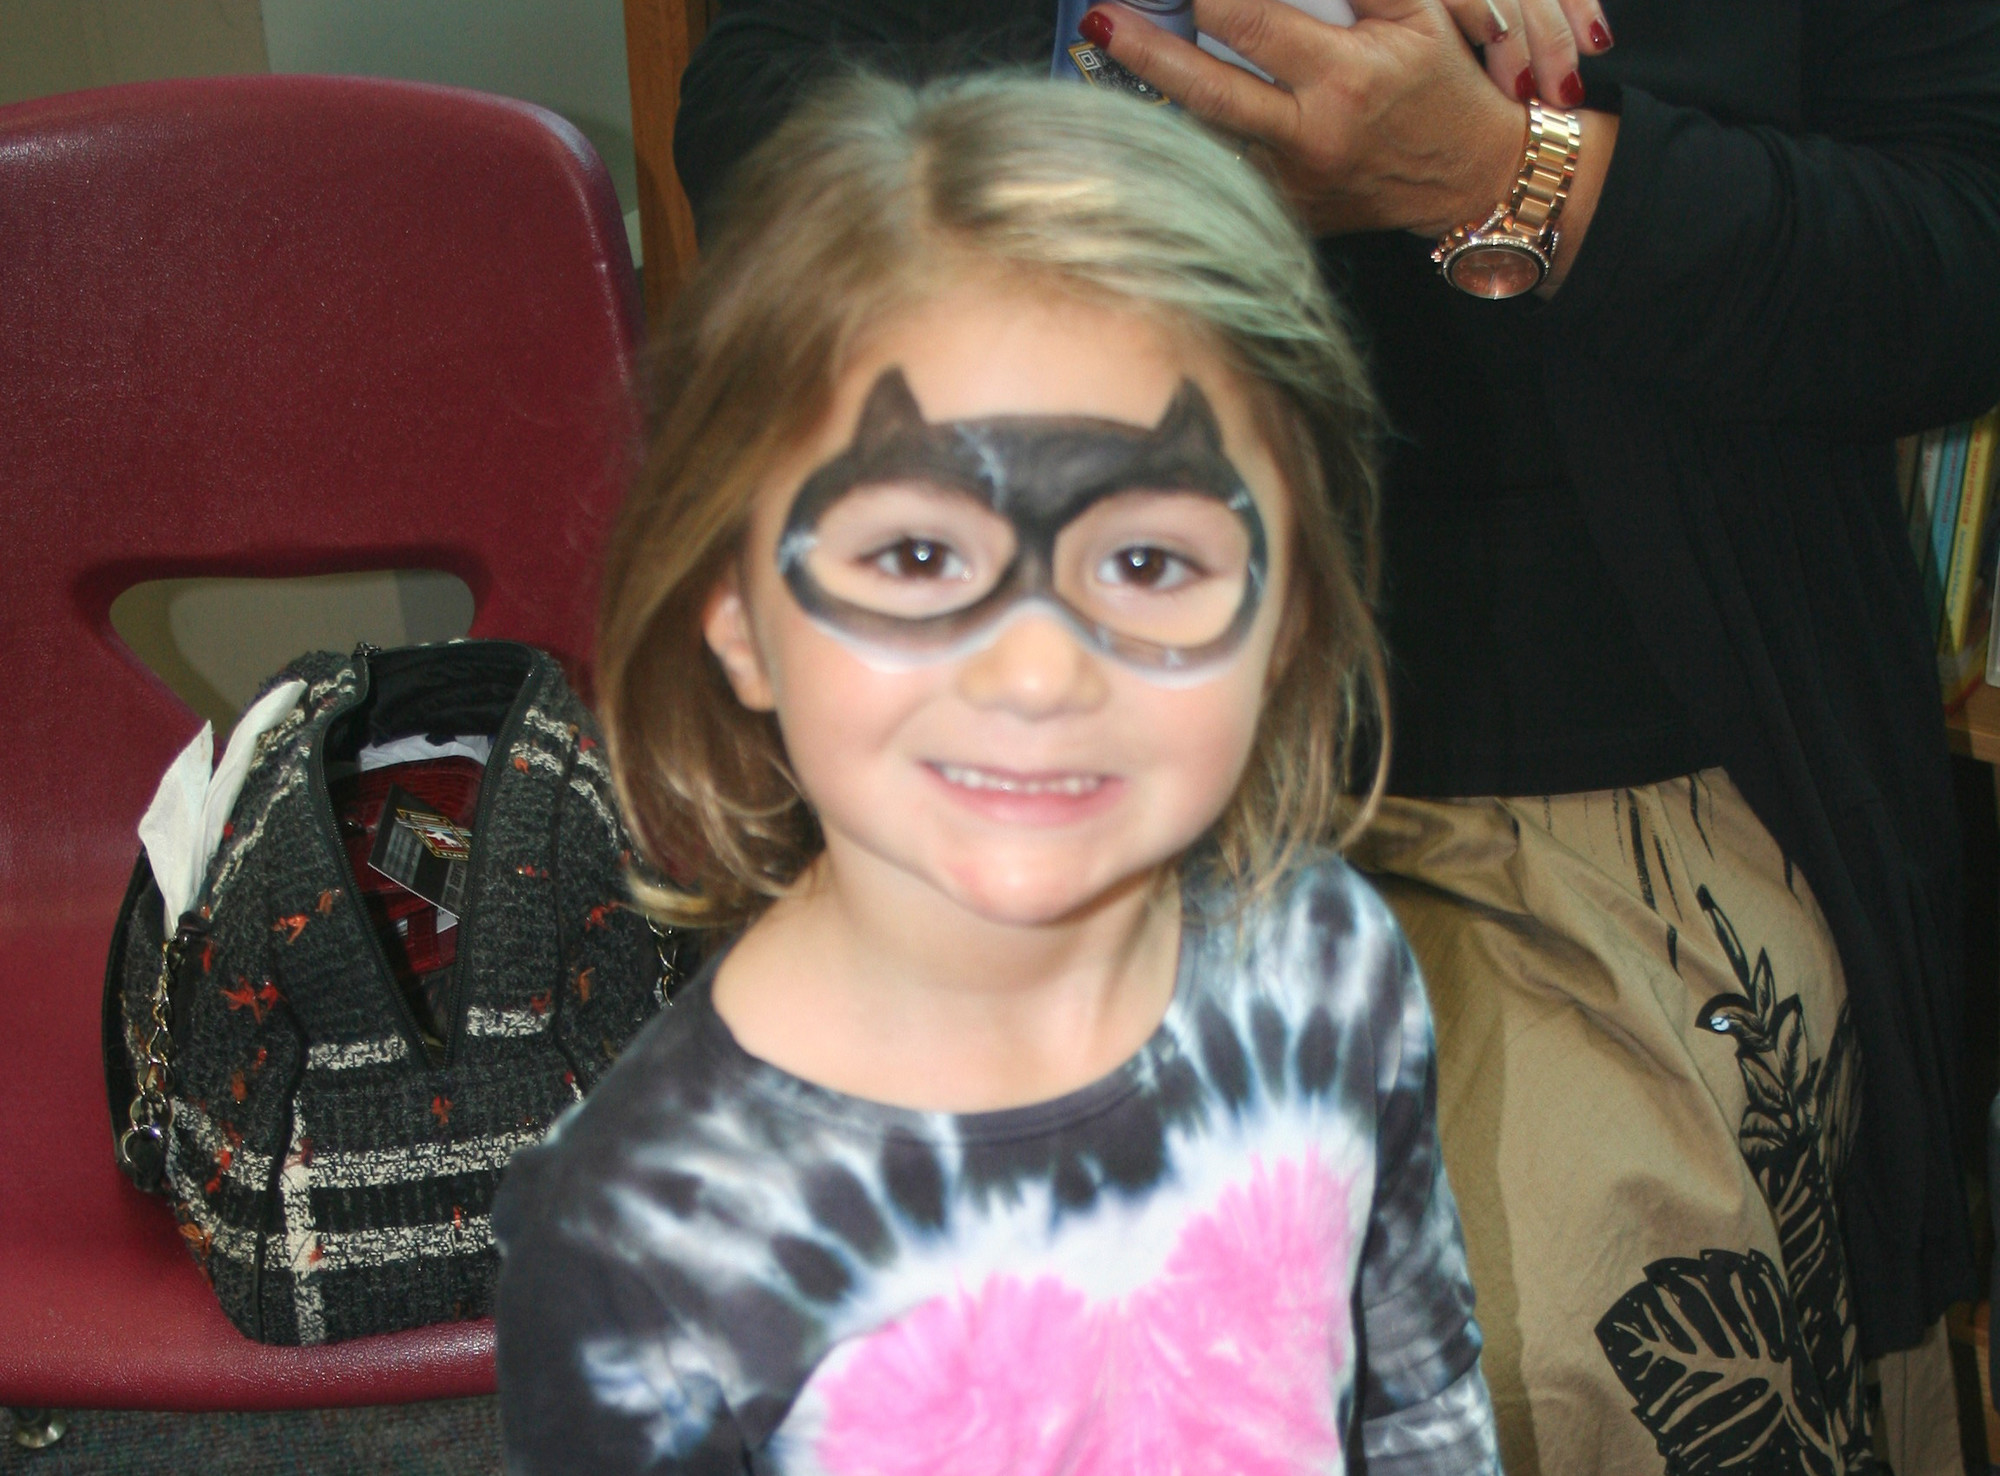 Julianna Berland had her face painted so she could be Catwoman for a day.